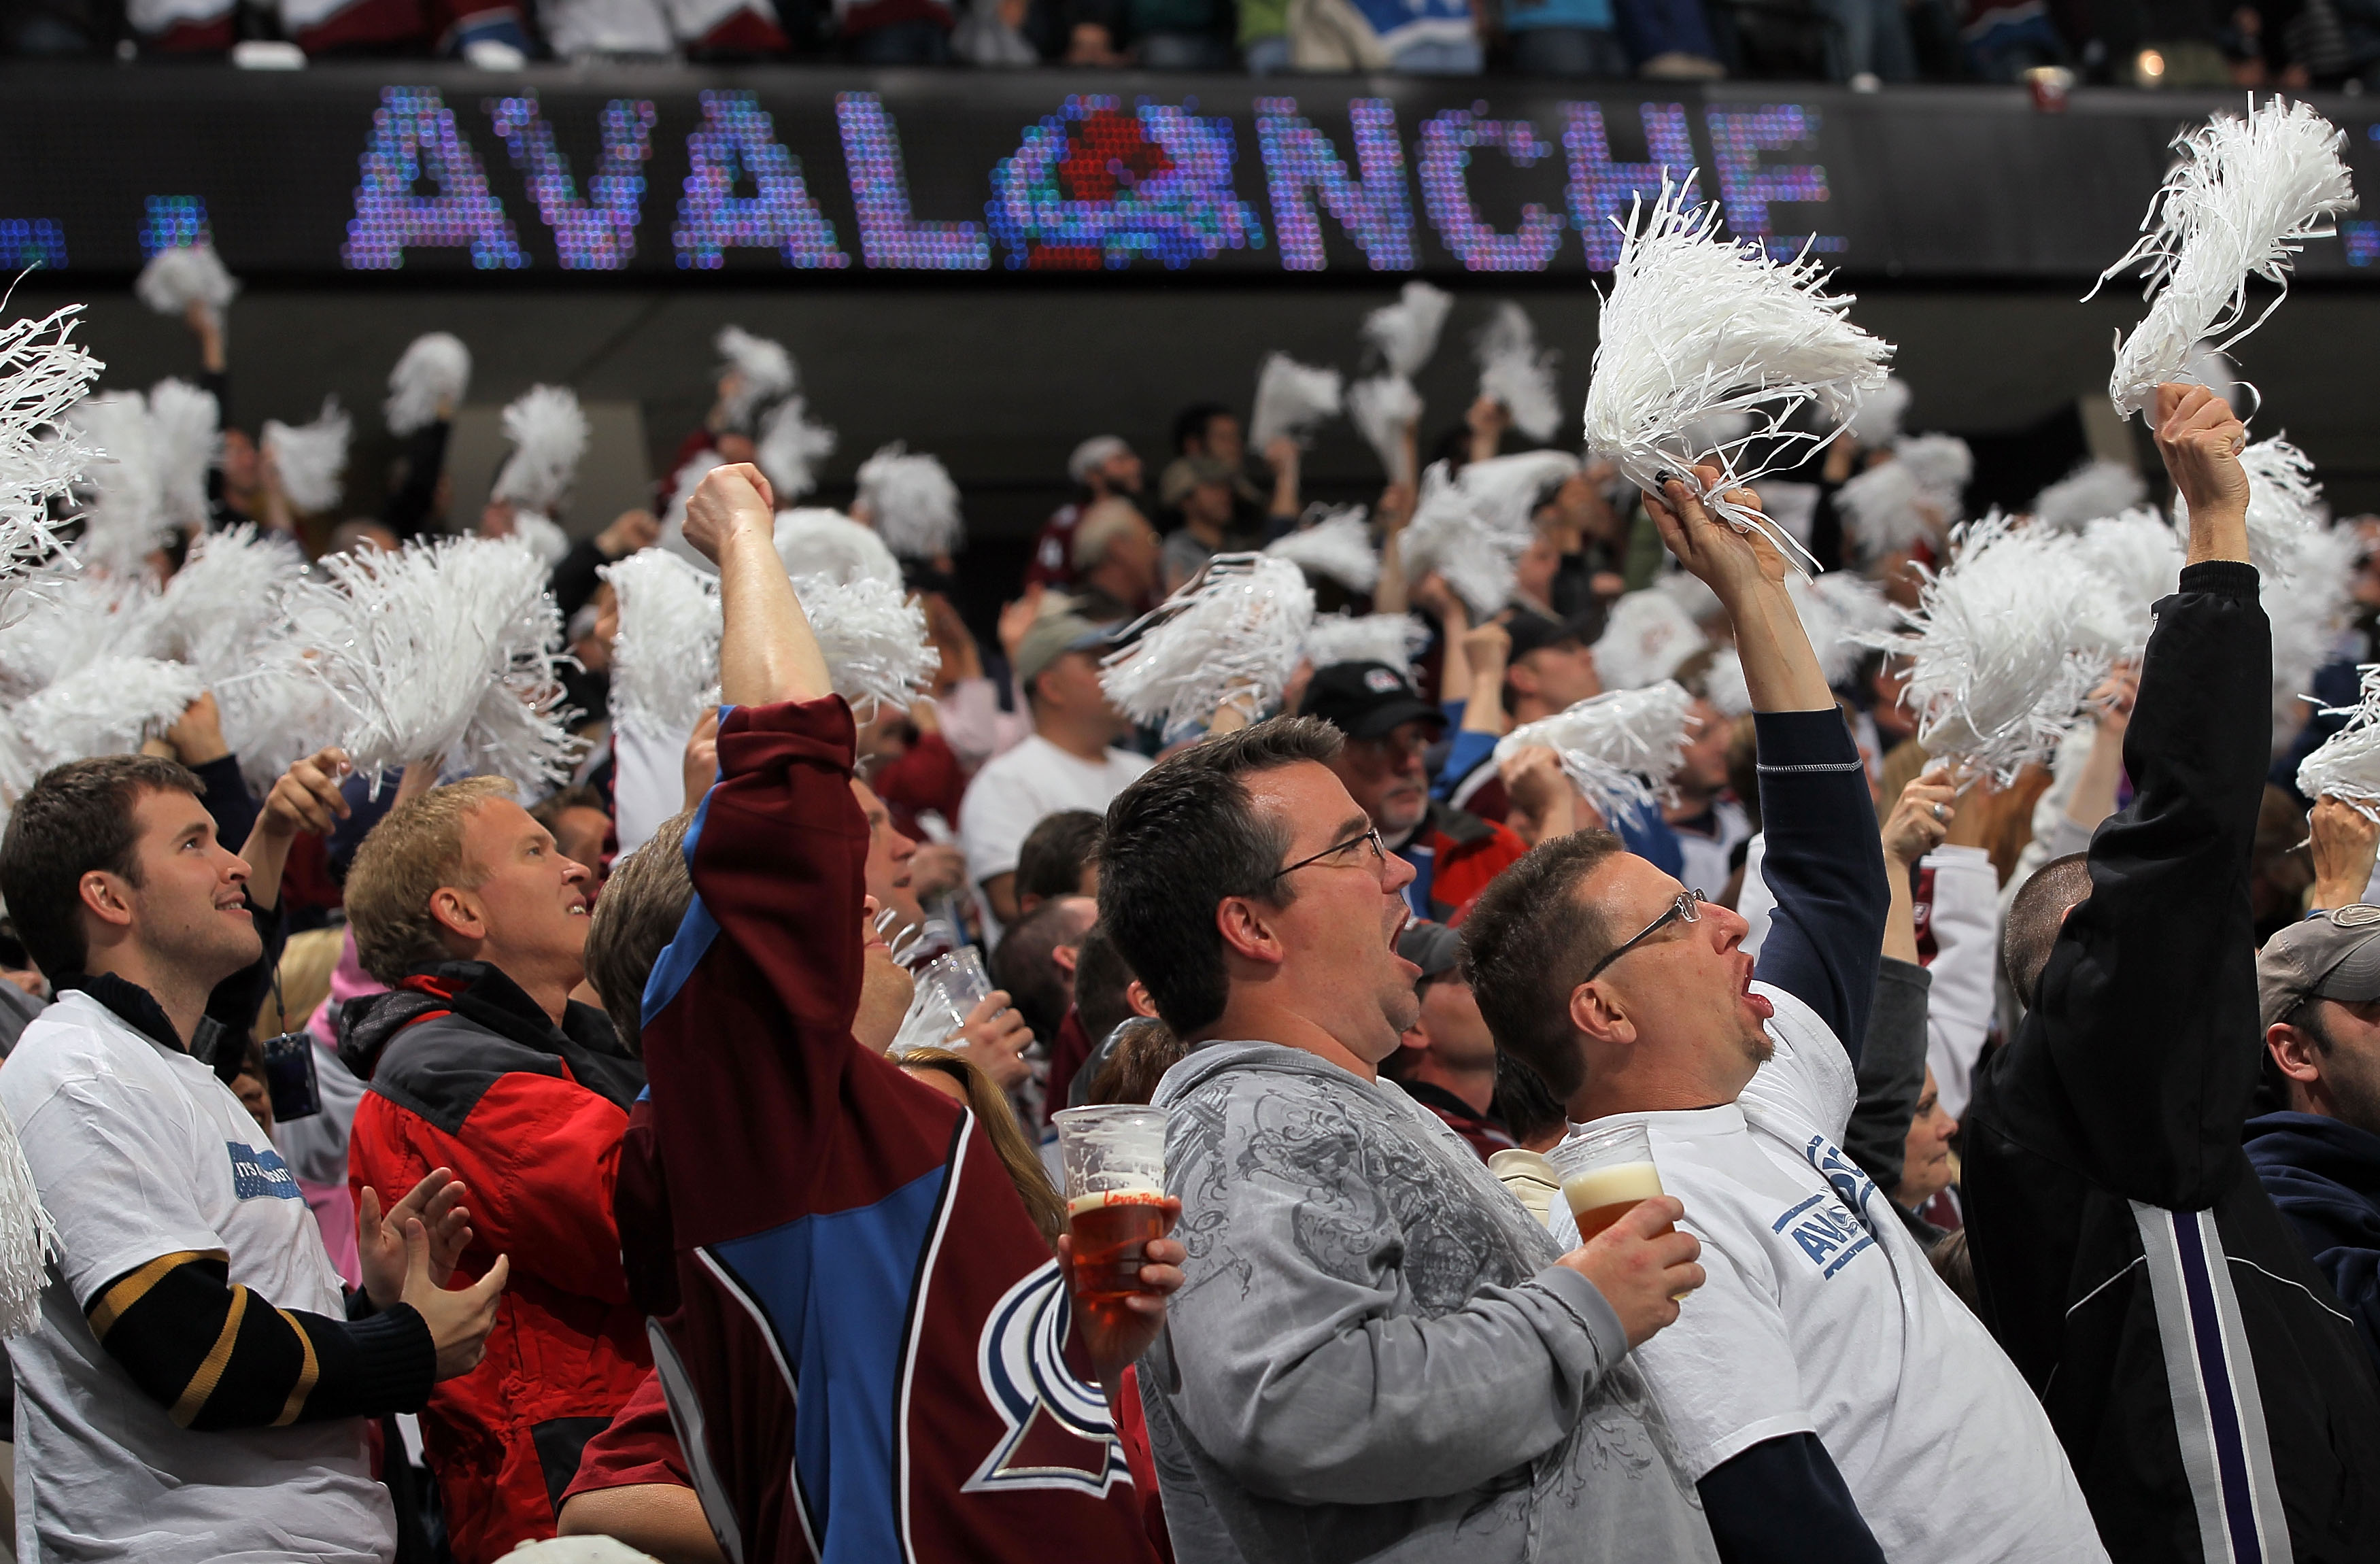 DENVER - APRIL 24:  Colorado Avalanche fans celebrate Marek Svatos' second period goal to tie the score 1-1 with the San Jose Sharks during Game Six of the Western Conference Quaterfinals of the 2010 Stanley Cup Playoffs at the Pepsi Center on April 24, 2